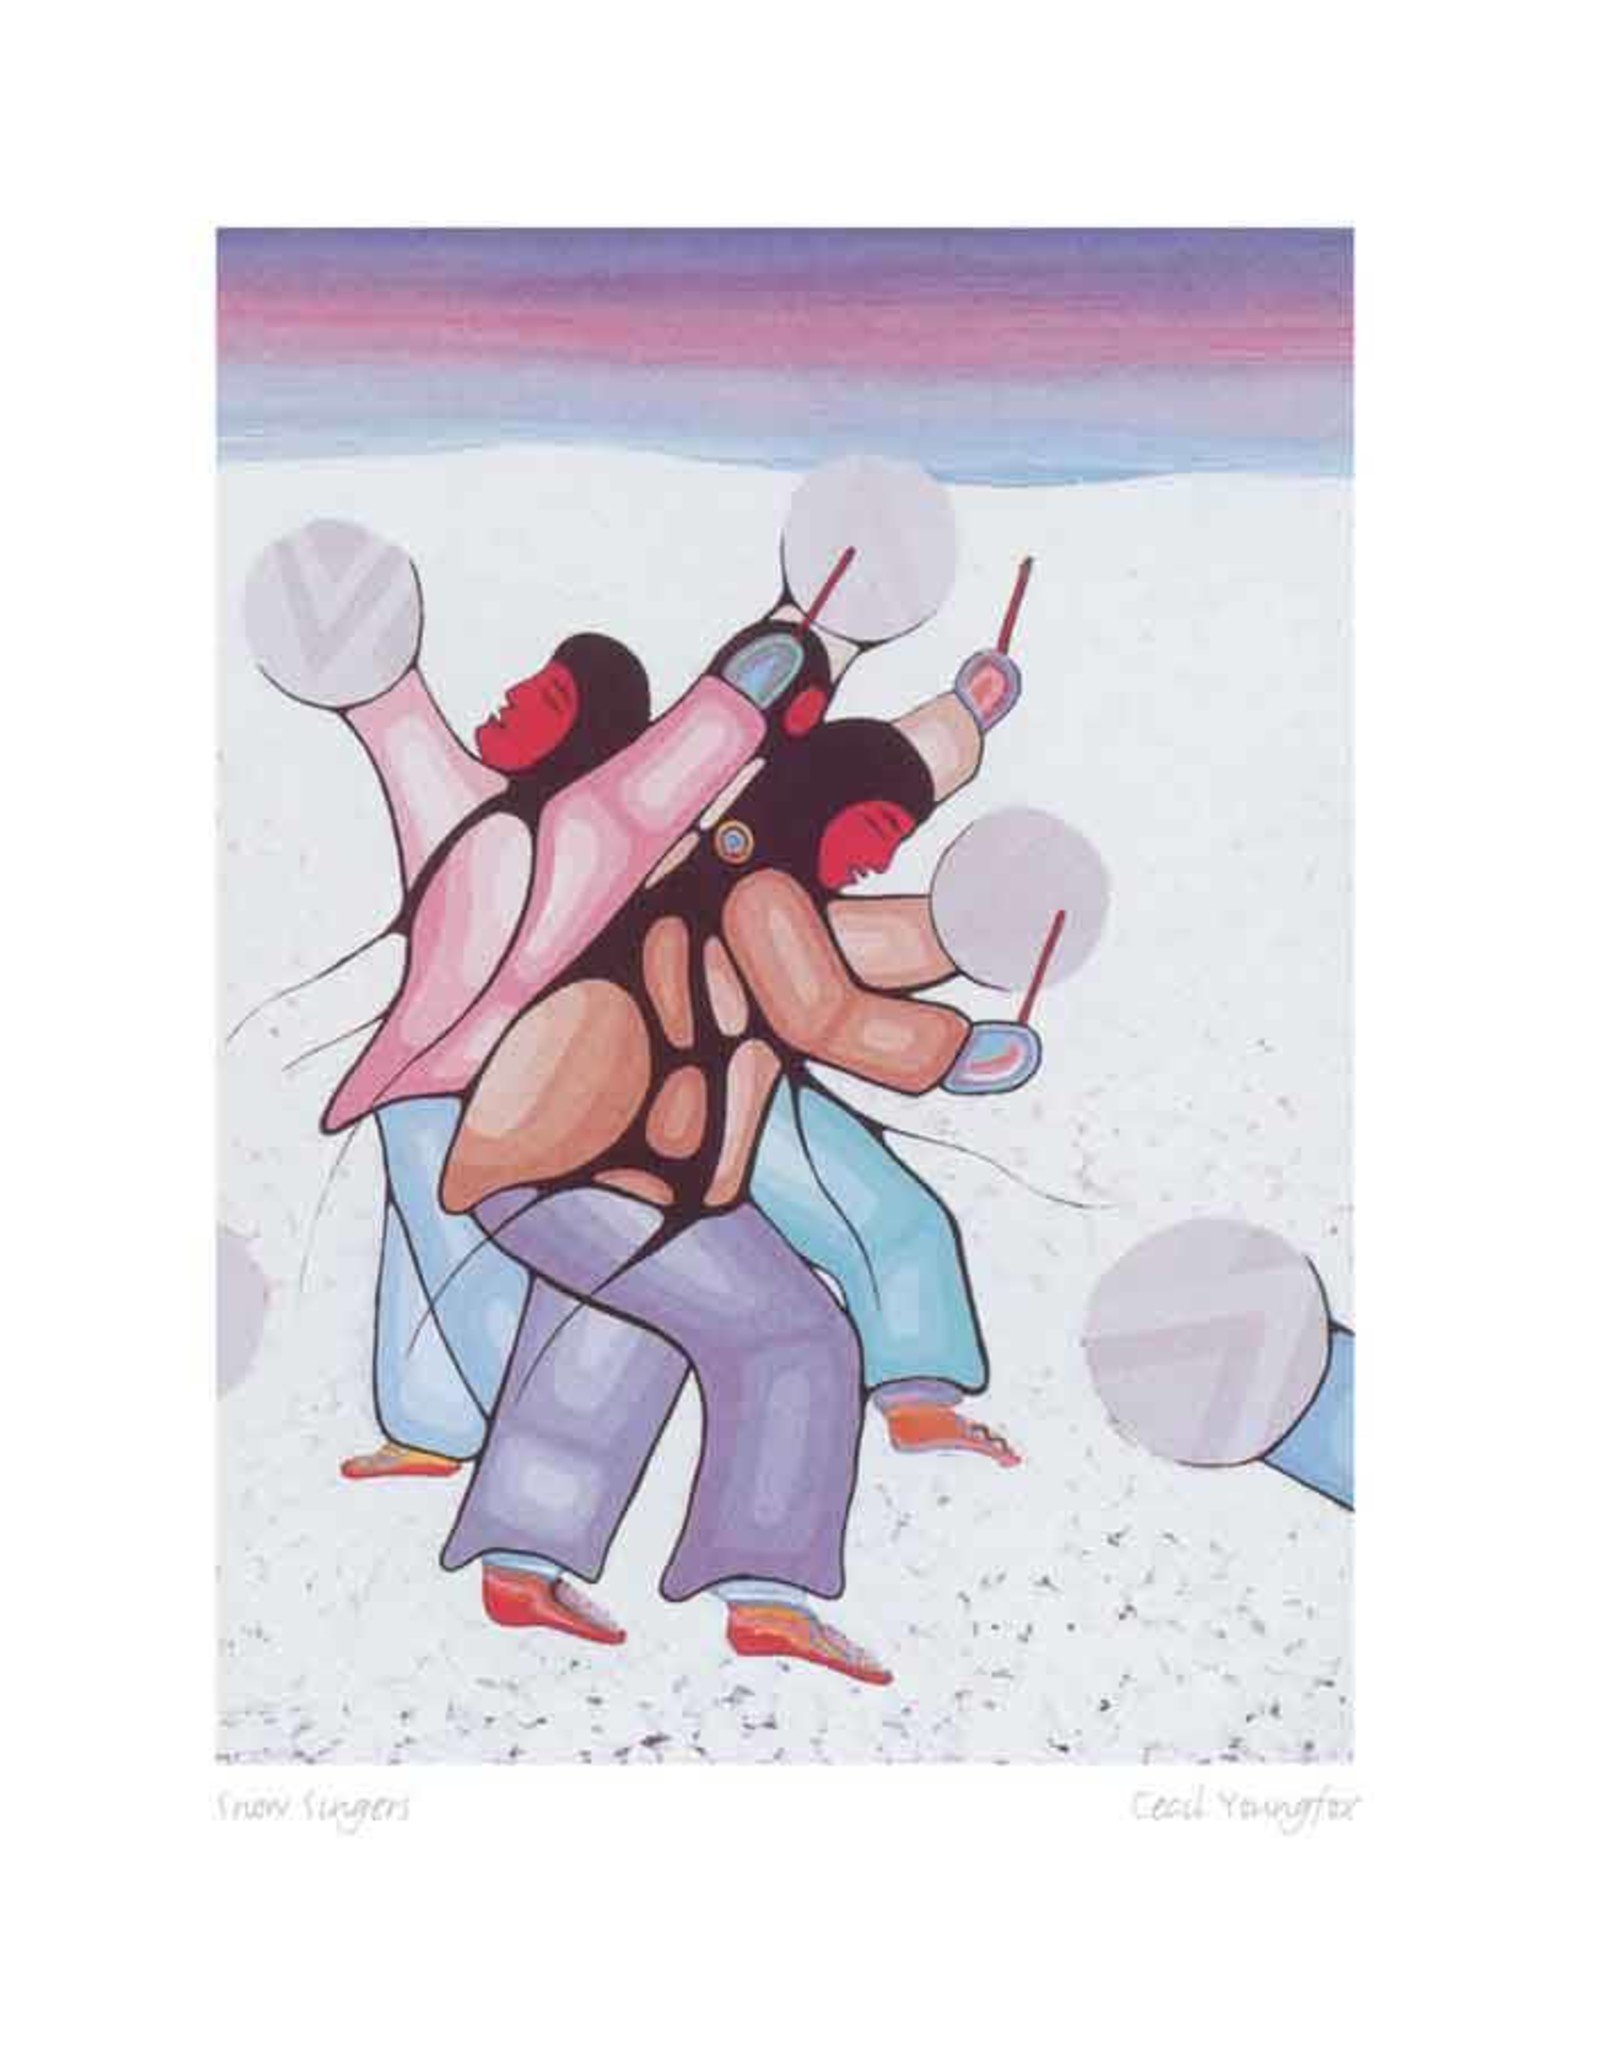 Snow Singers by Cecil Youngfox Framed